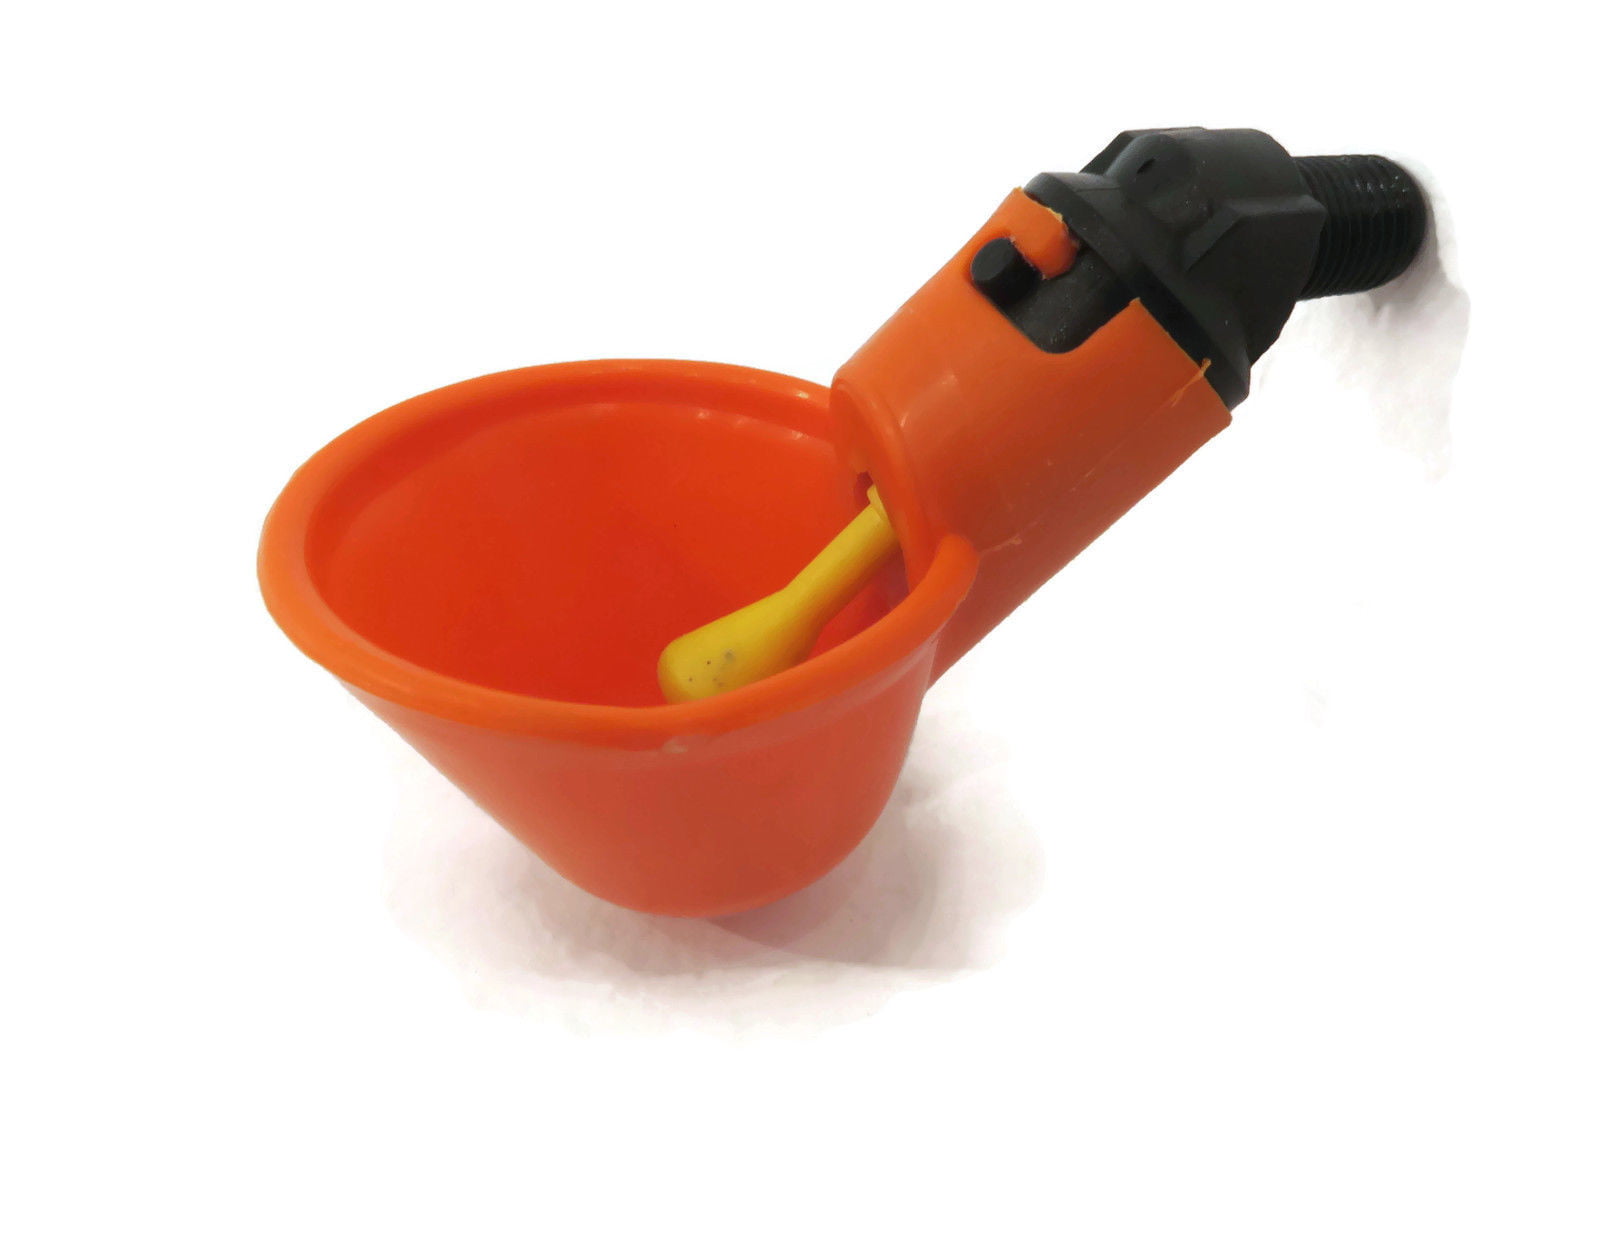 POULTRY DRINKER Waterers for Chickens Hens Chicks Turkey Quail Poultry Birds 4 